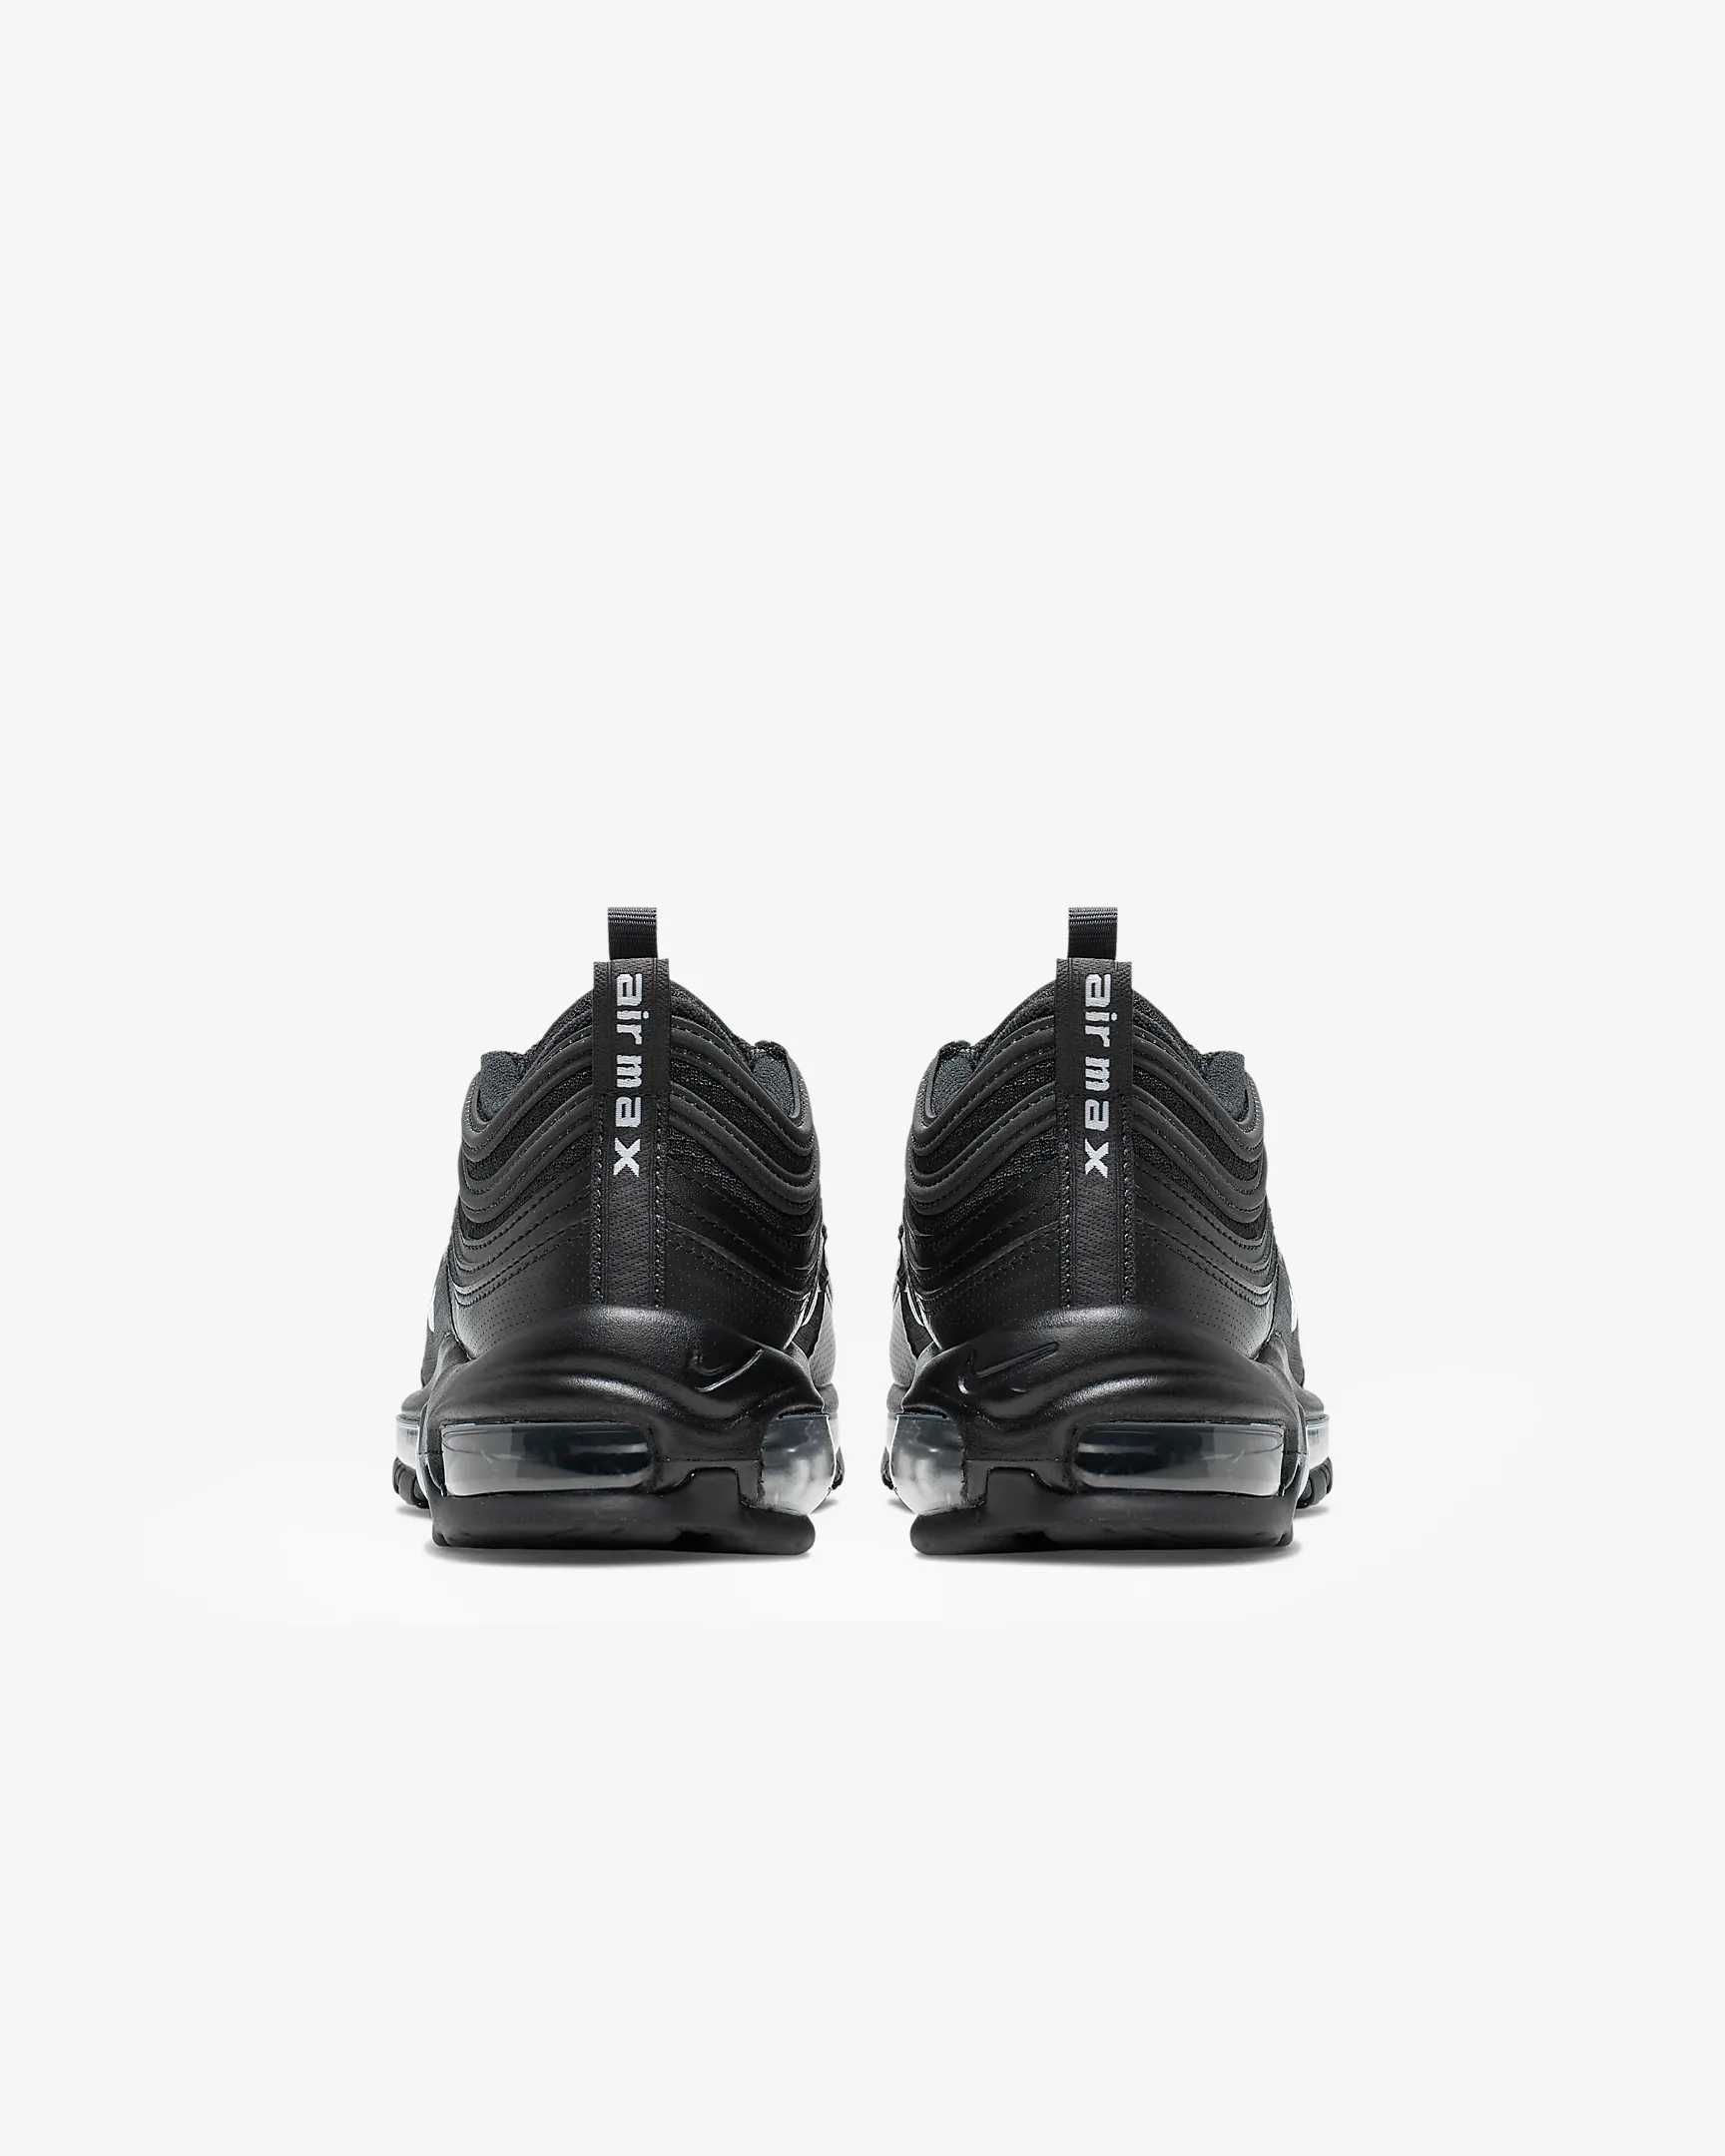 Nike Air Max 97 Black / Outlet